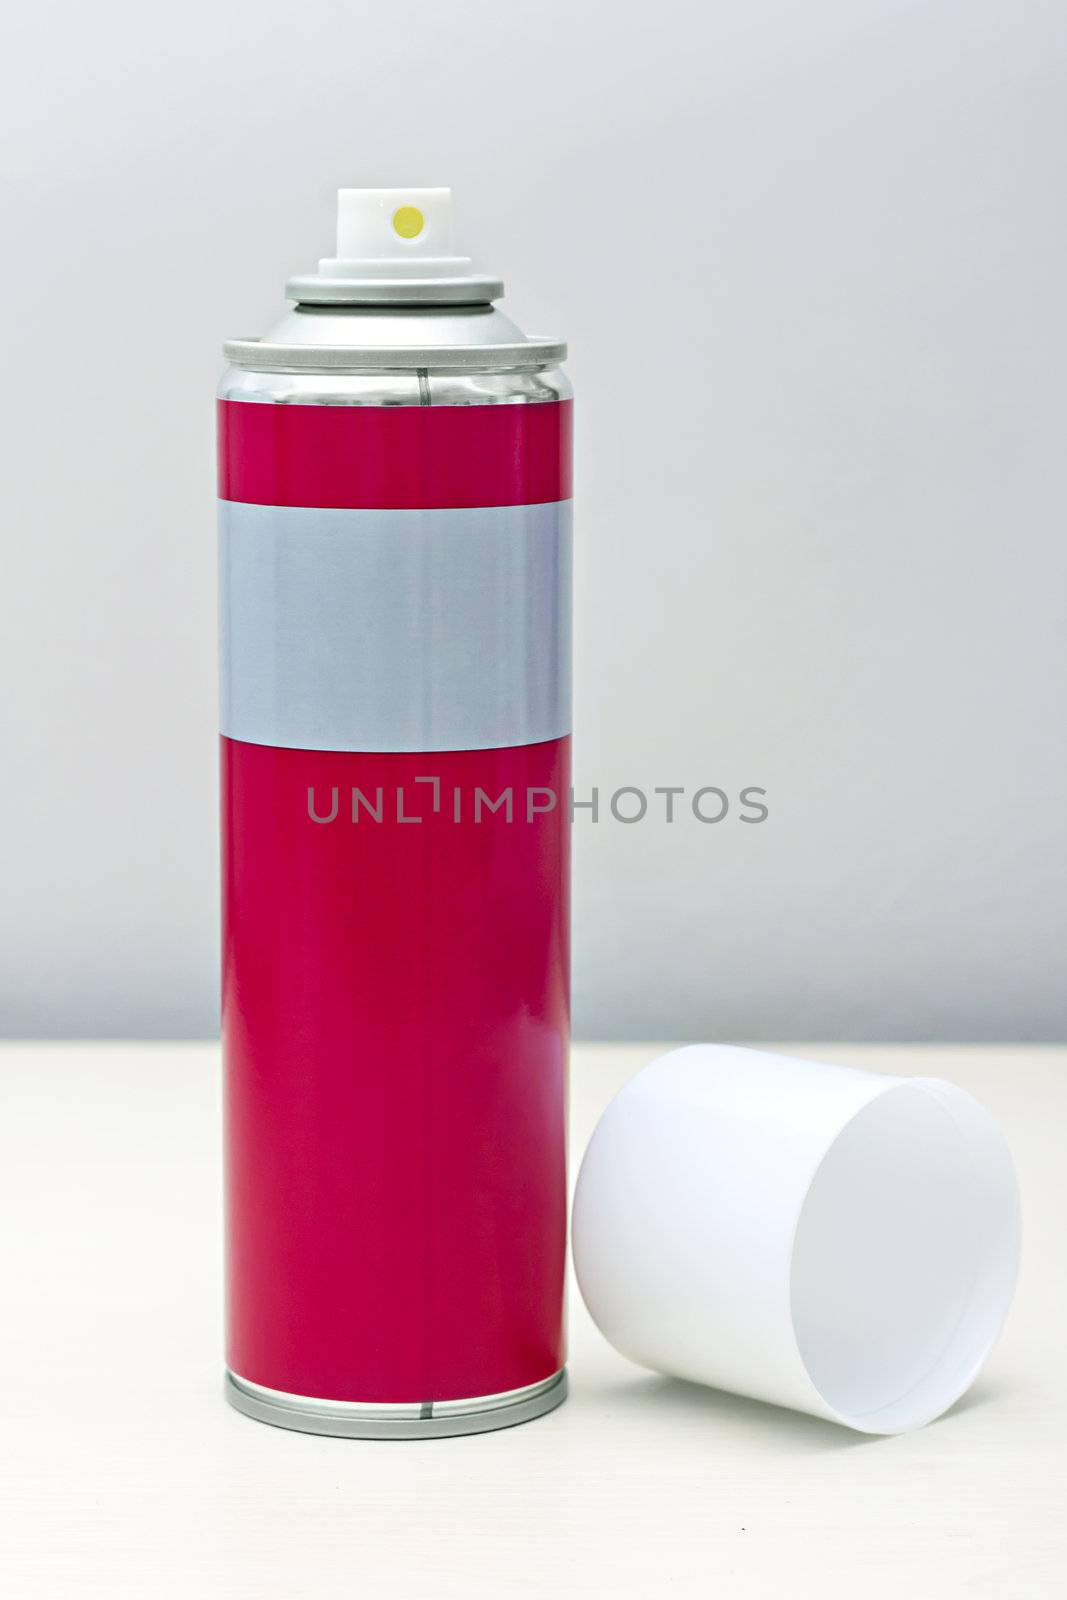 image reddish gray with a white spray can lid